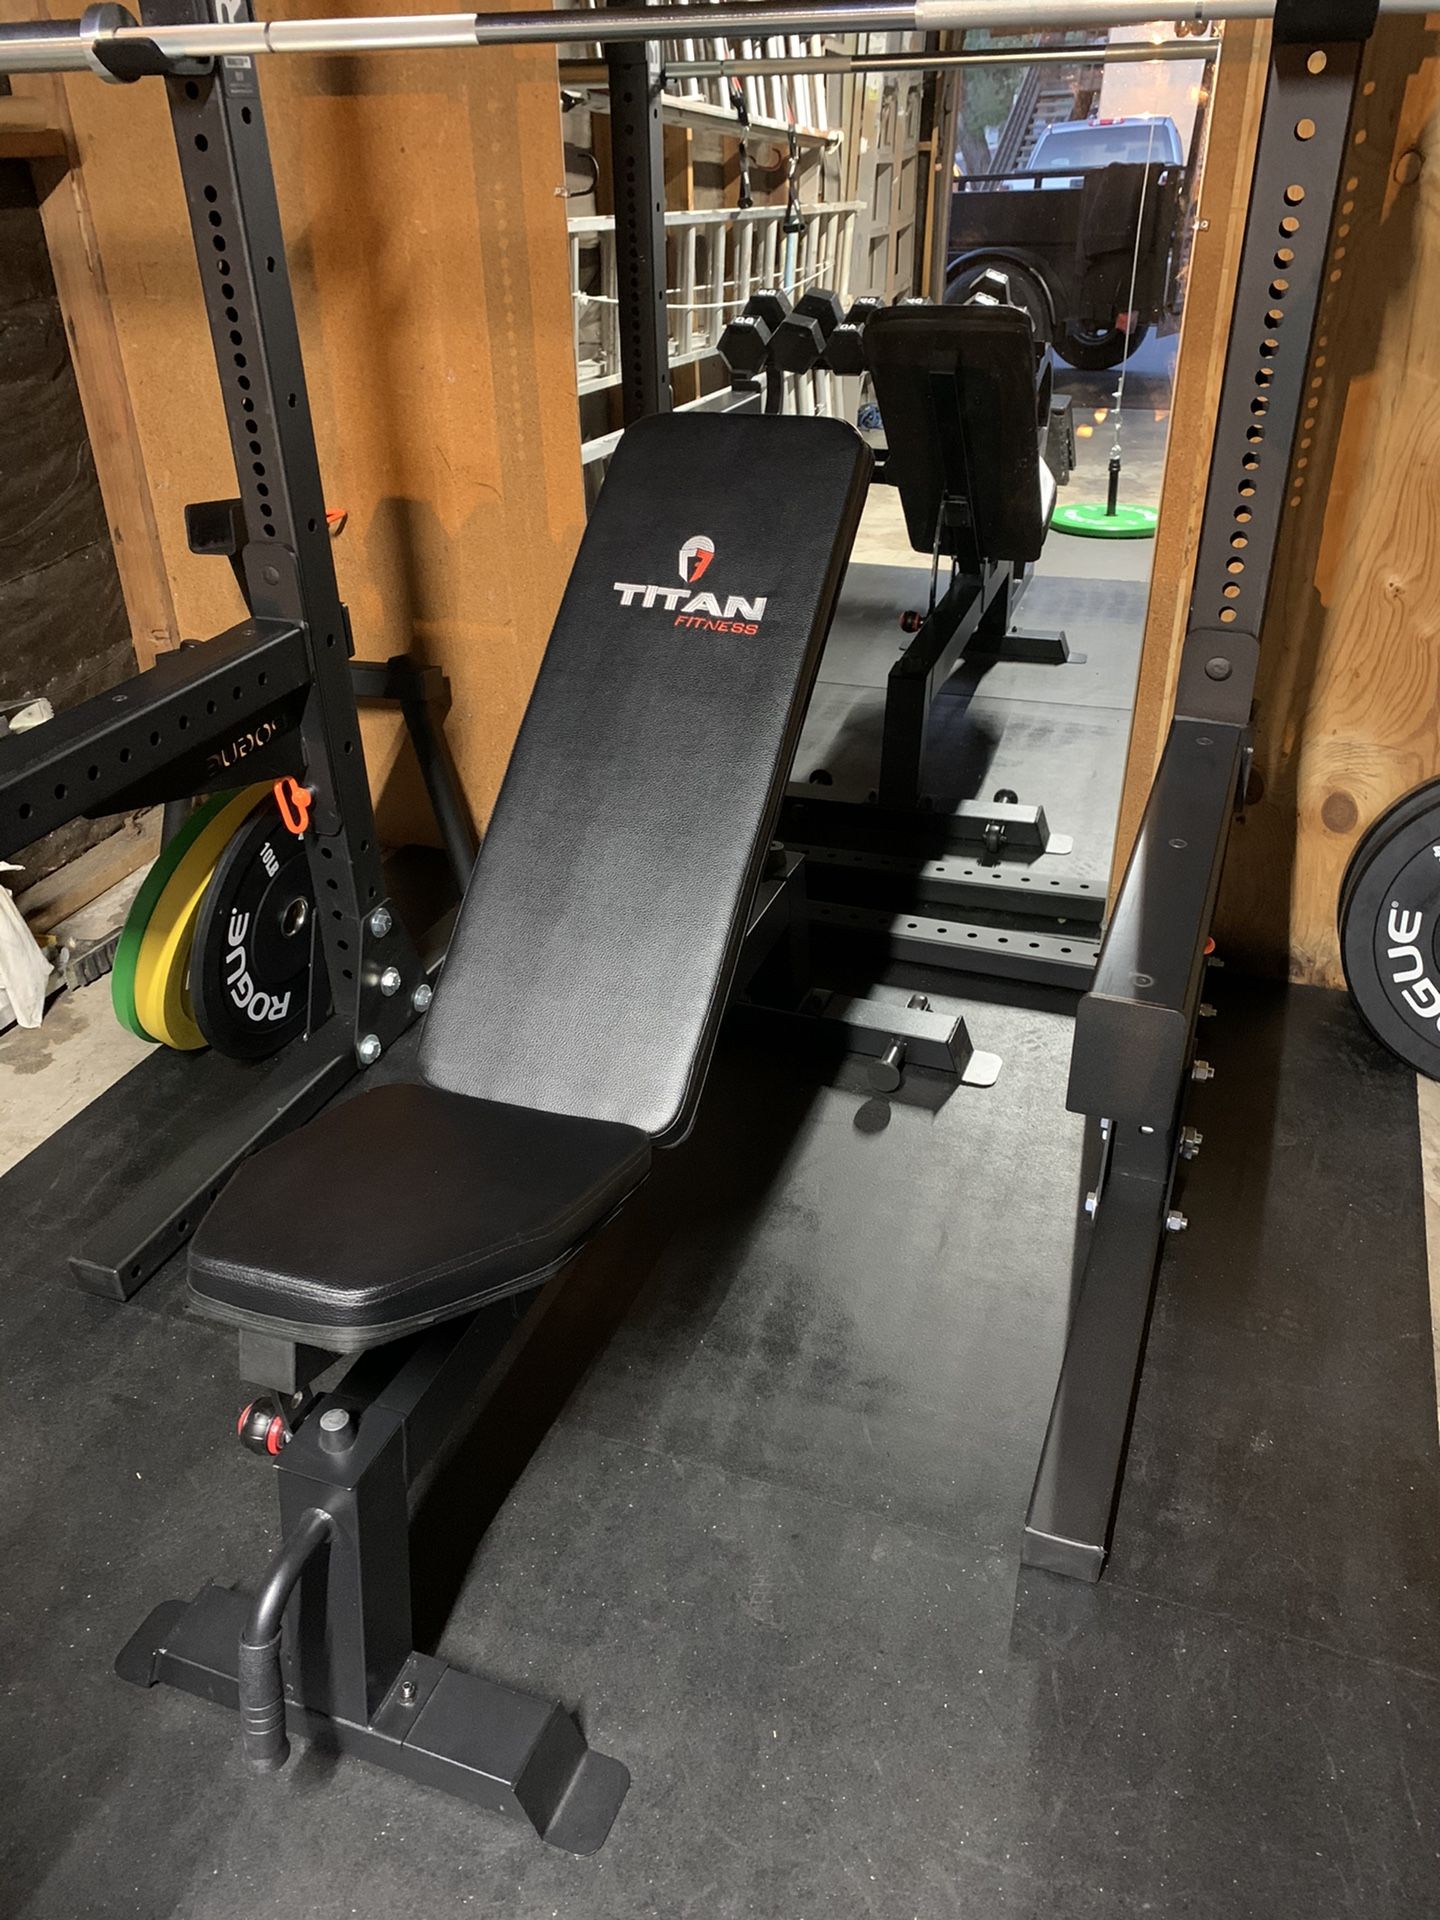 Adjustable bench for flat, 4/5 levels incline, military press. Titan fitness like new